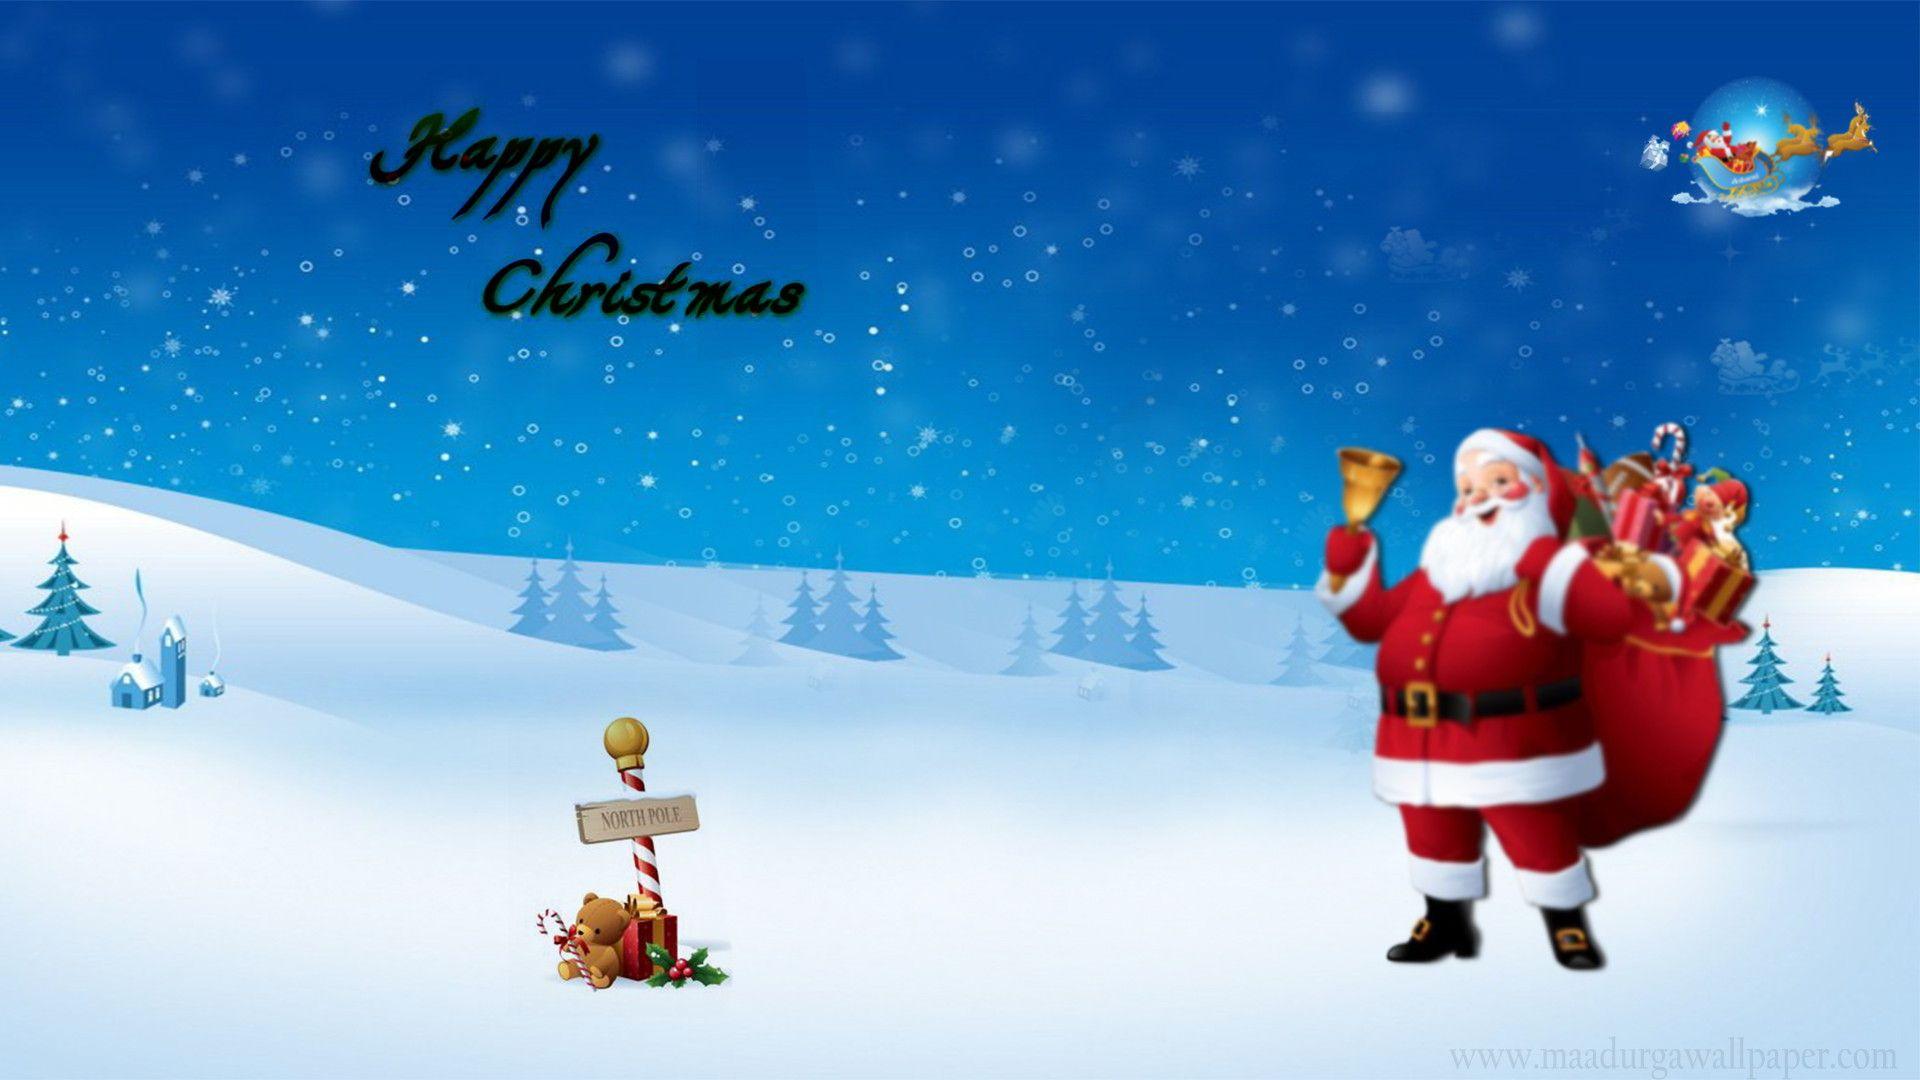 Santa Claus image, beautiful picture & HD photo download